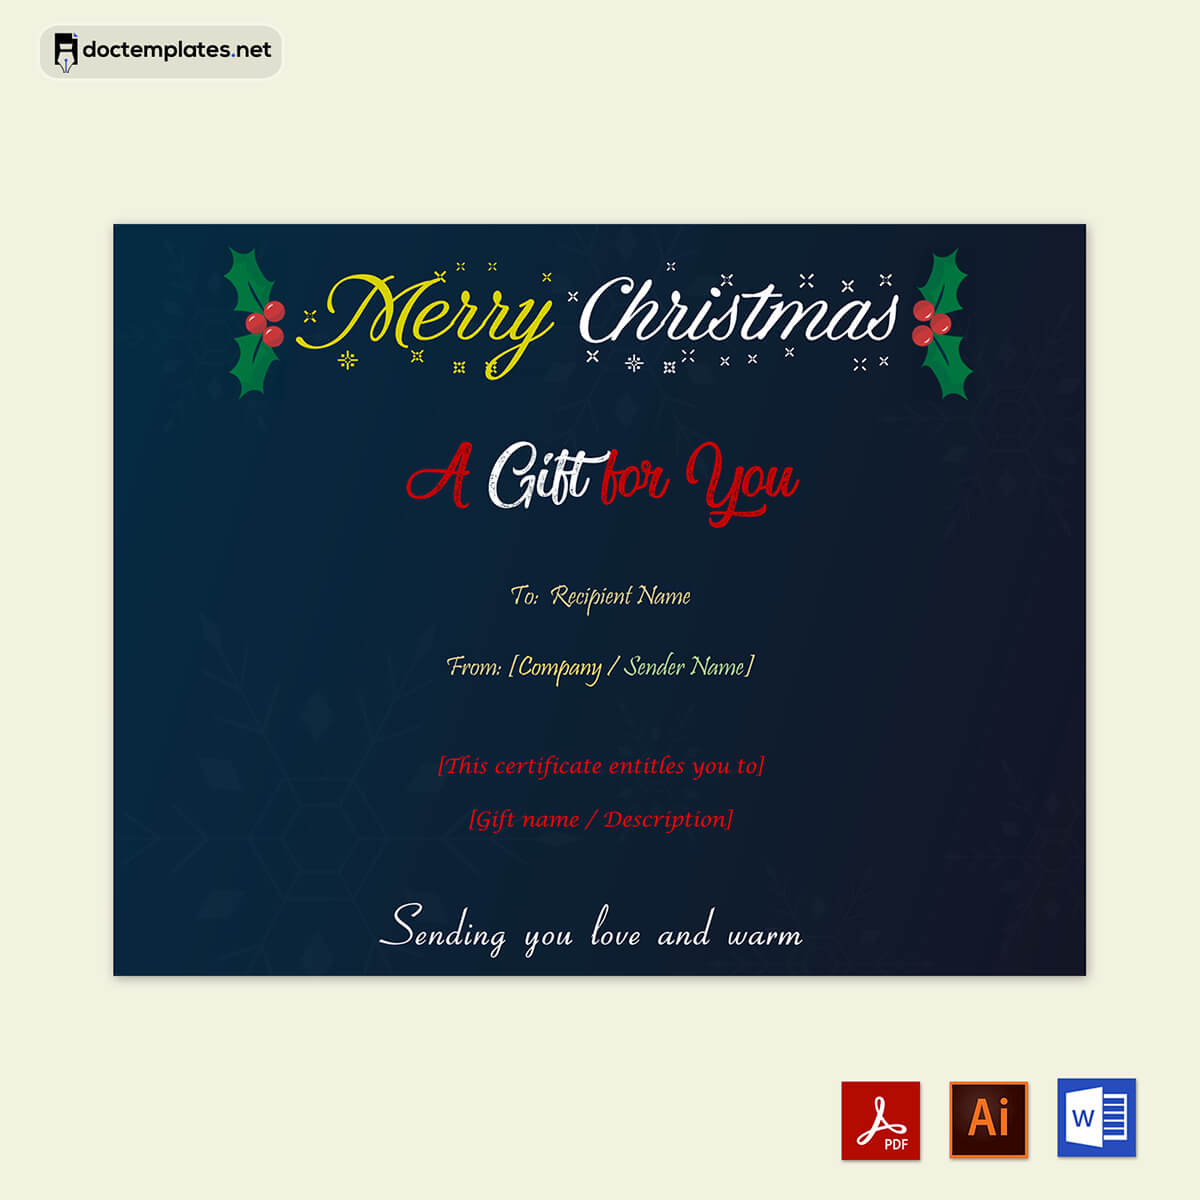 Image of Gift Certificate template PDF
Gift Certificate template PDF
01